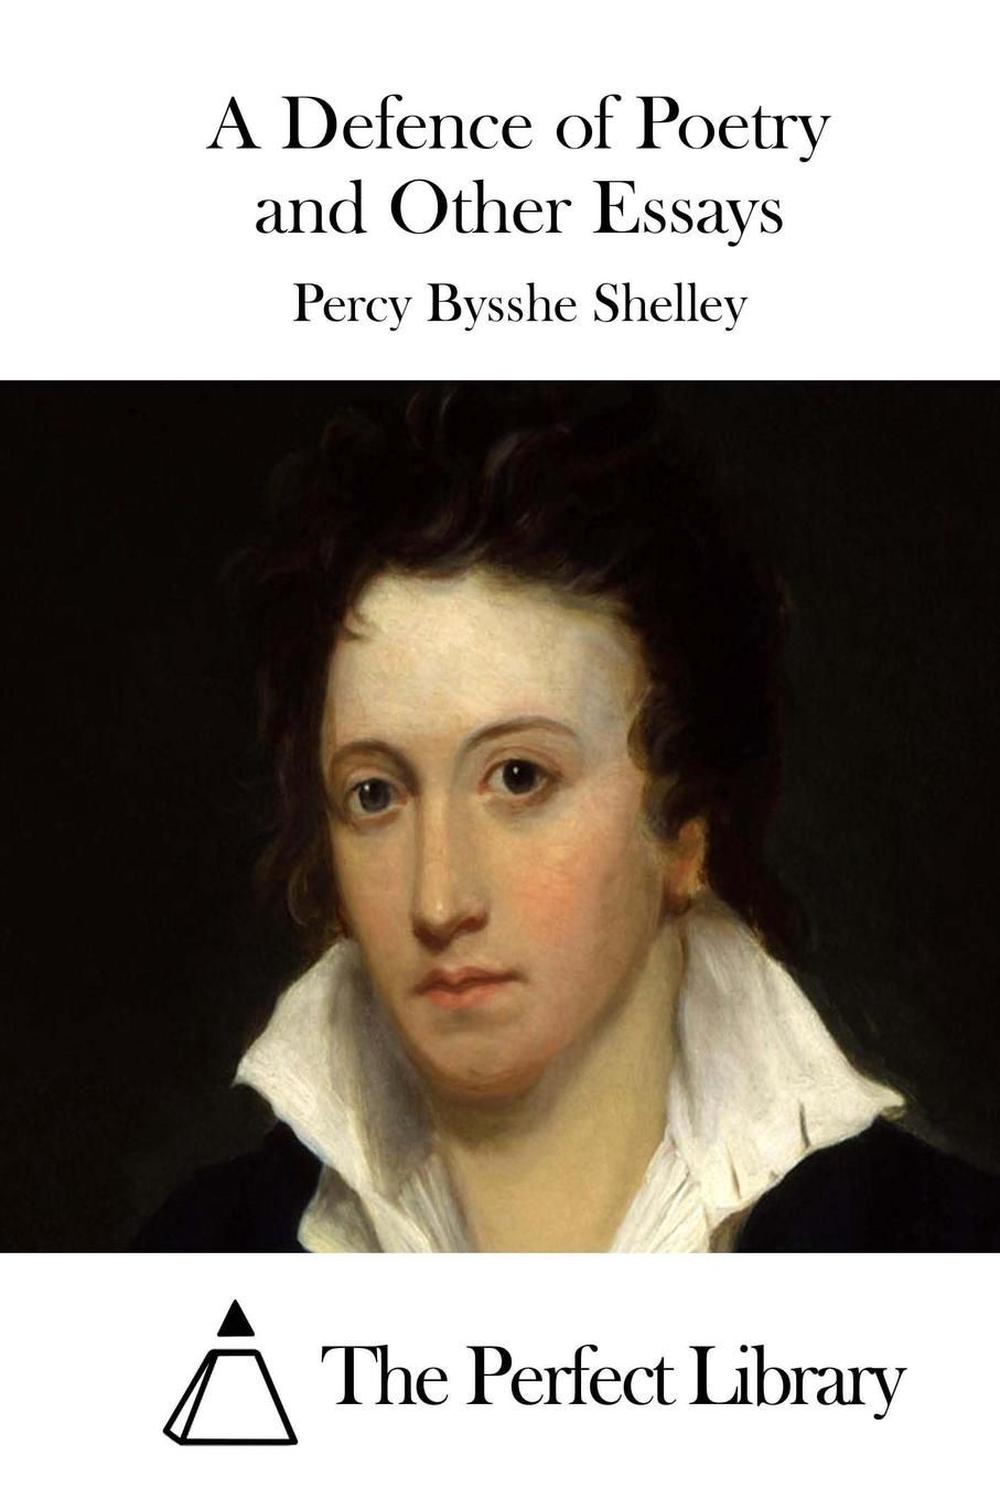 The Complete Poems by Percy Bysshe Shelley